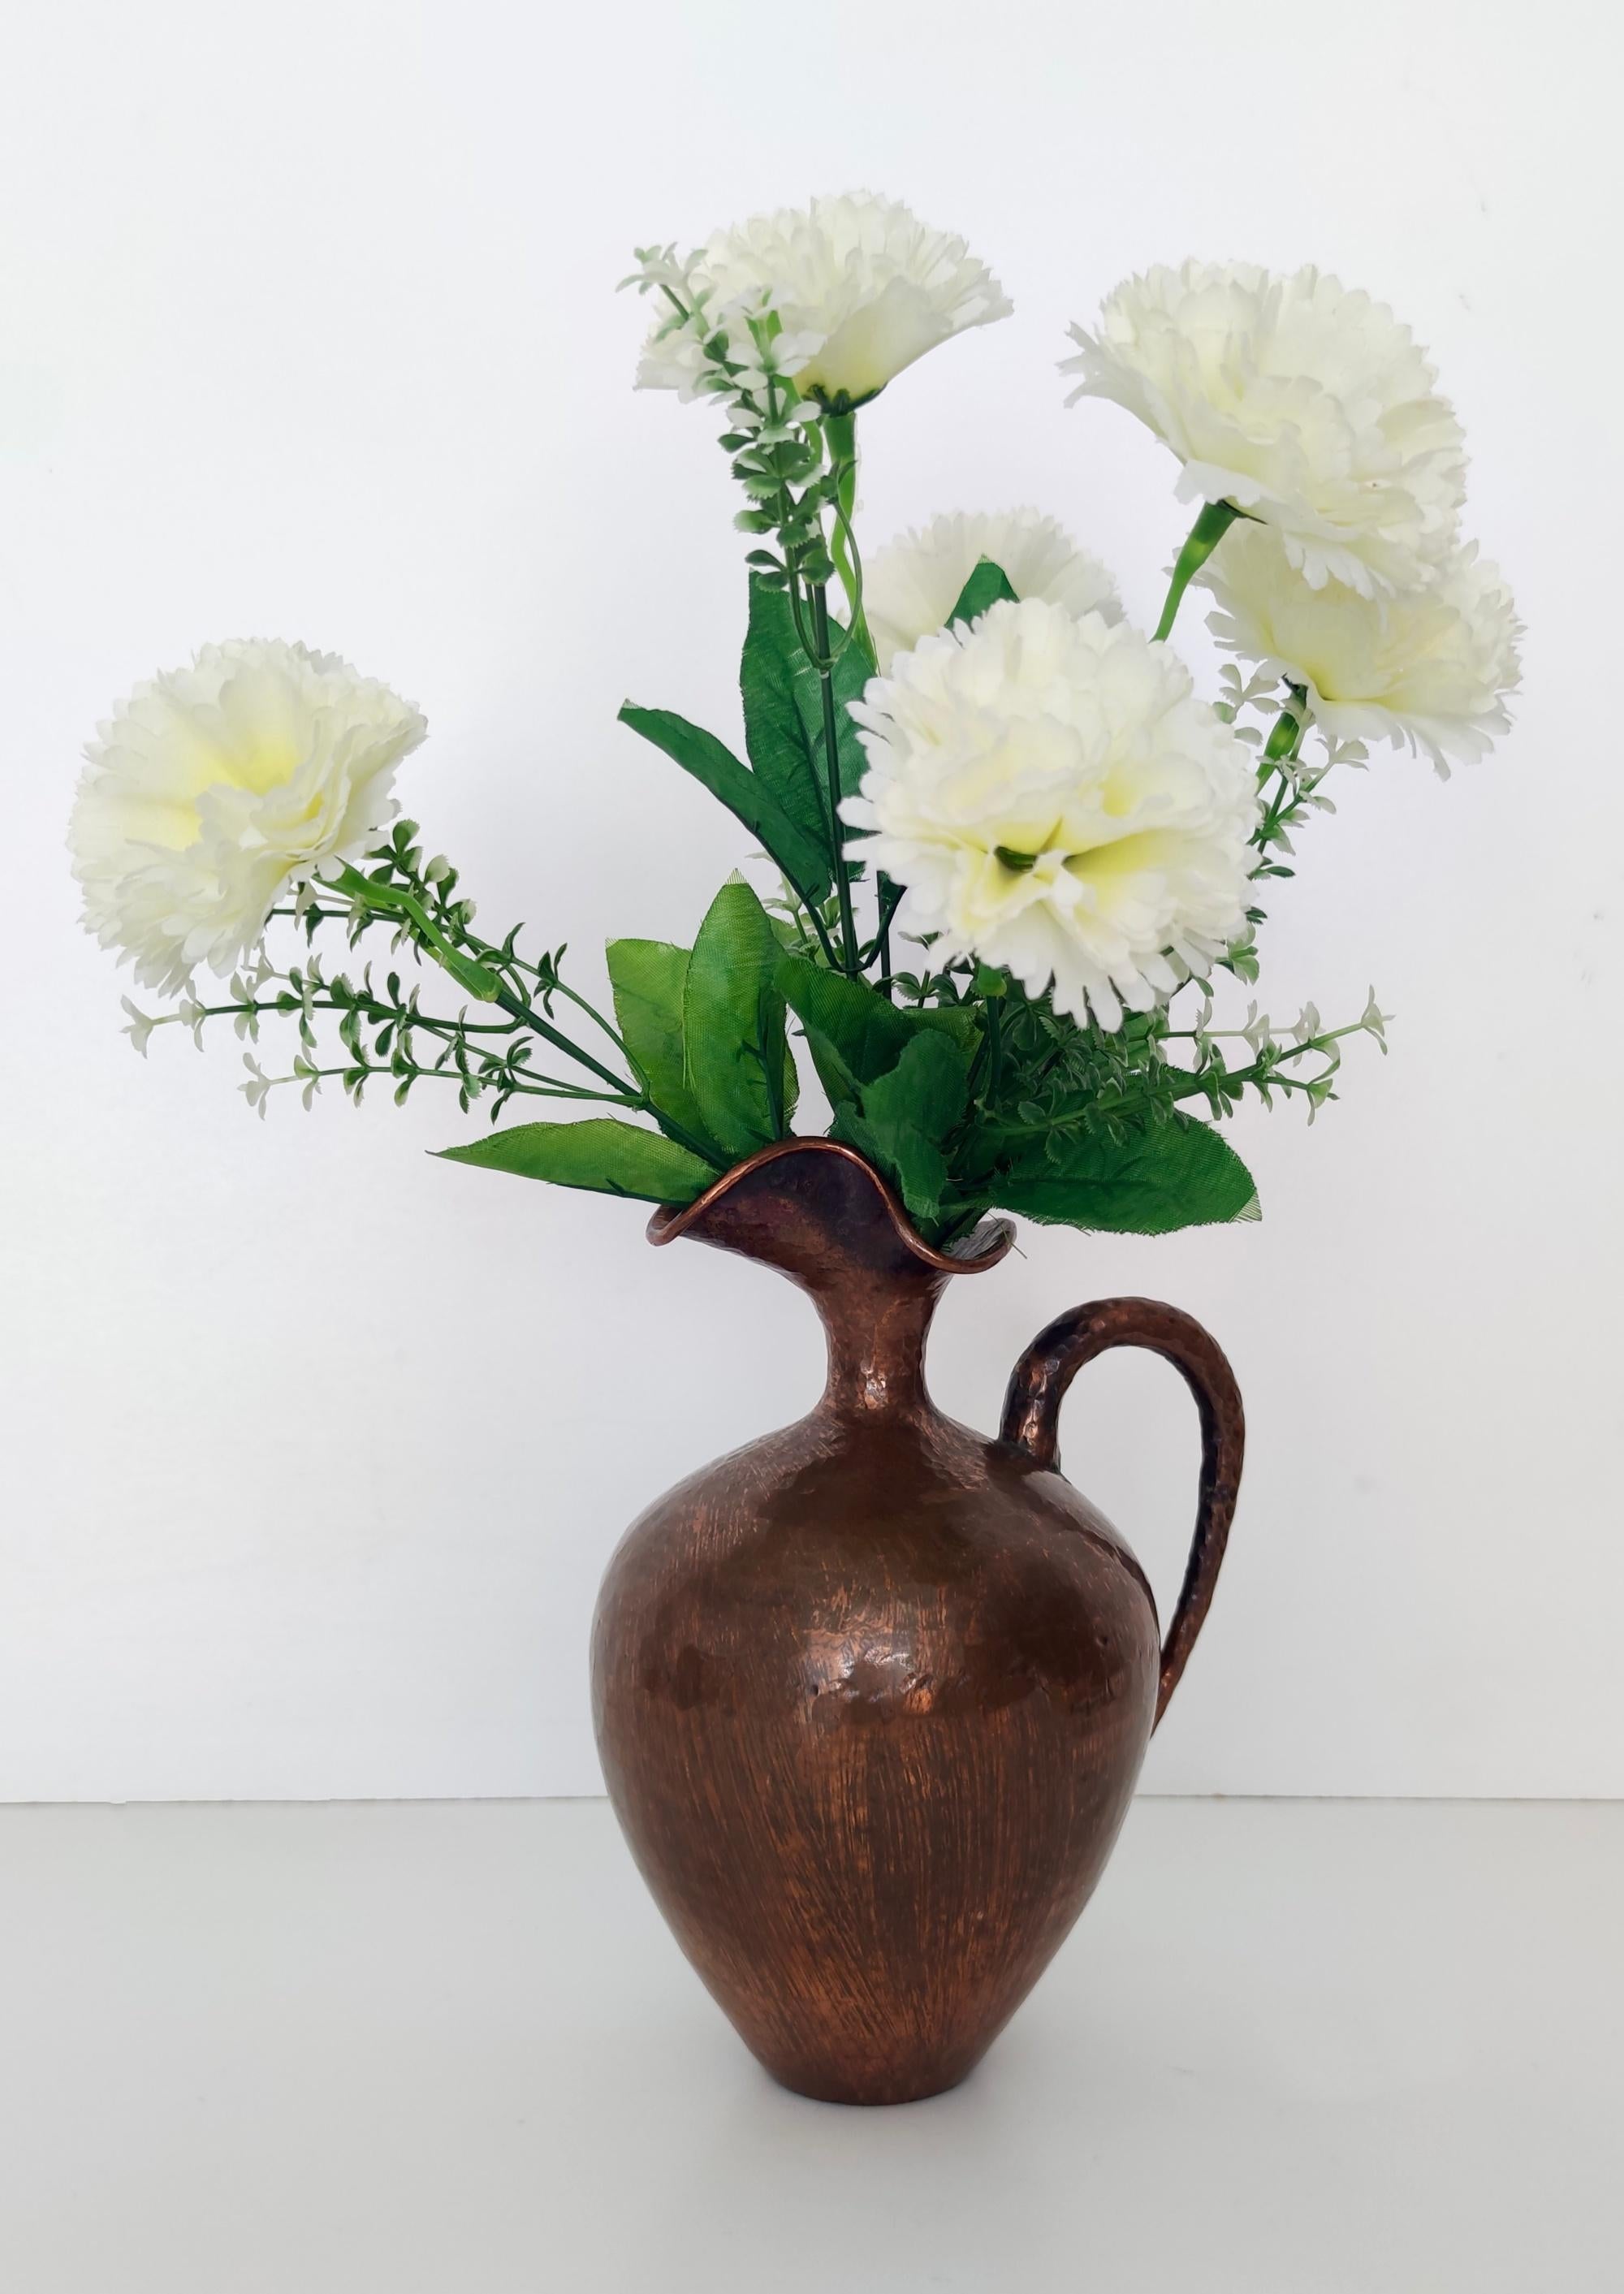 Made in Italy, 1950s.
This pitcher vase is made in embossed copper. 
Its minimal and classical, but still modern. Its design perfectly embodies the spirit of the age. 
It is a vintage piece, therefore it might show slight traces of use, but it can